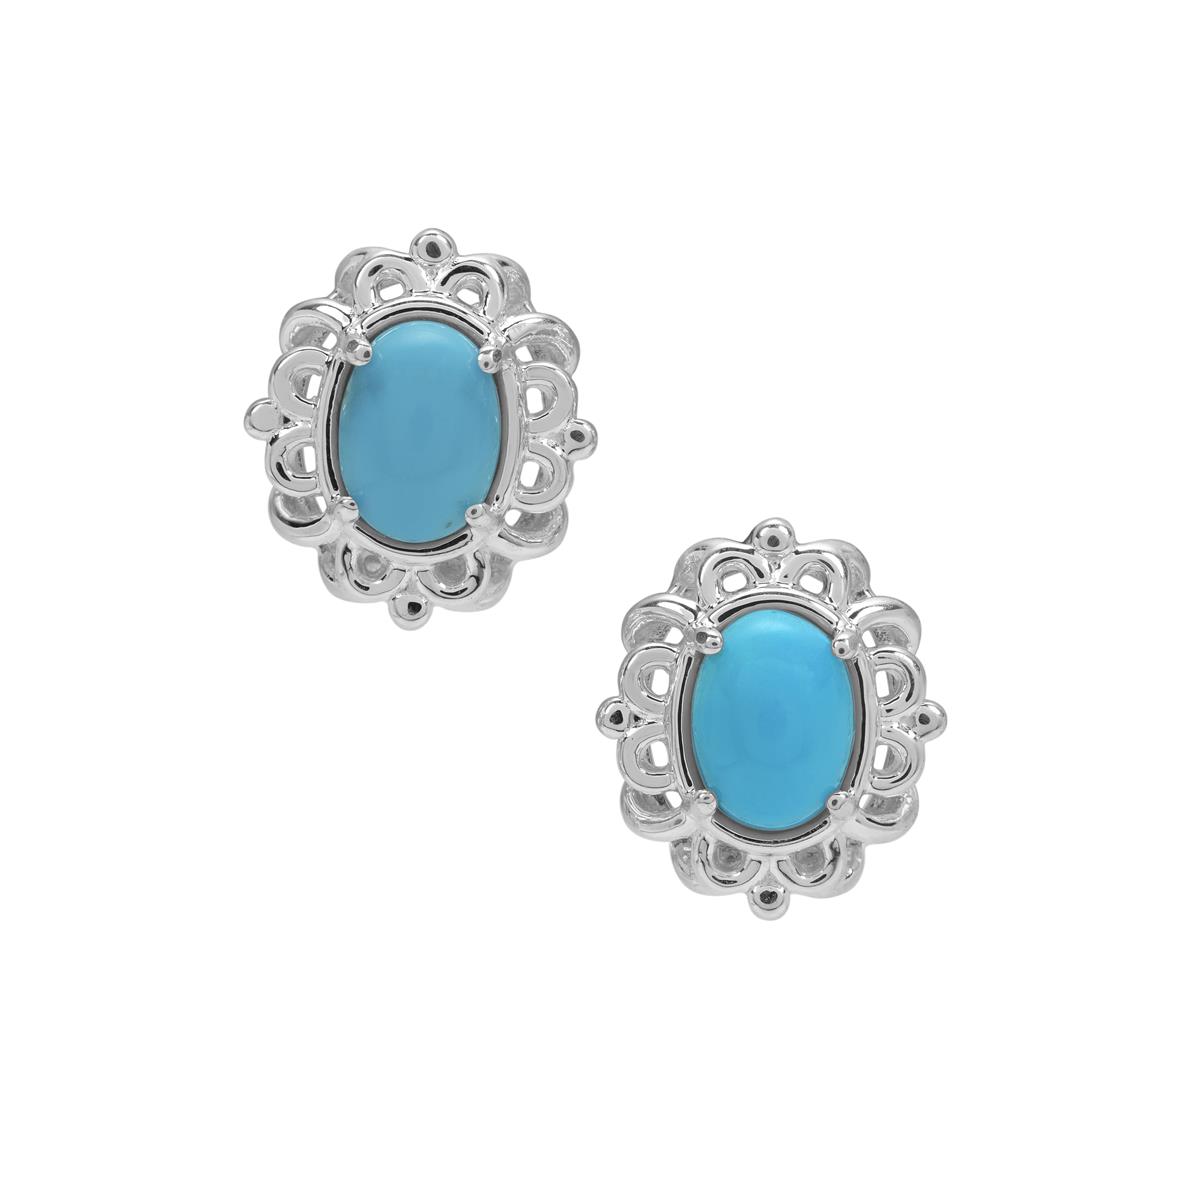 1.70ct Sleeping Beauty Turquoise Sterling Silver Earrings | Gemporia